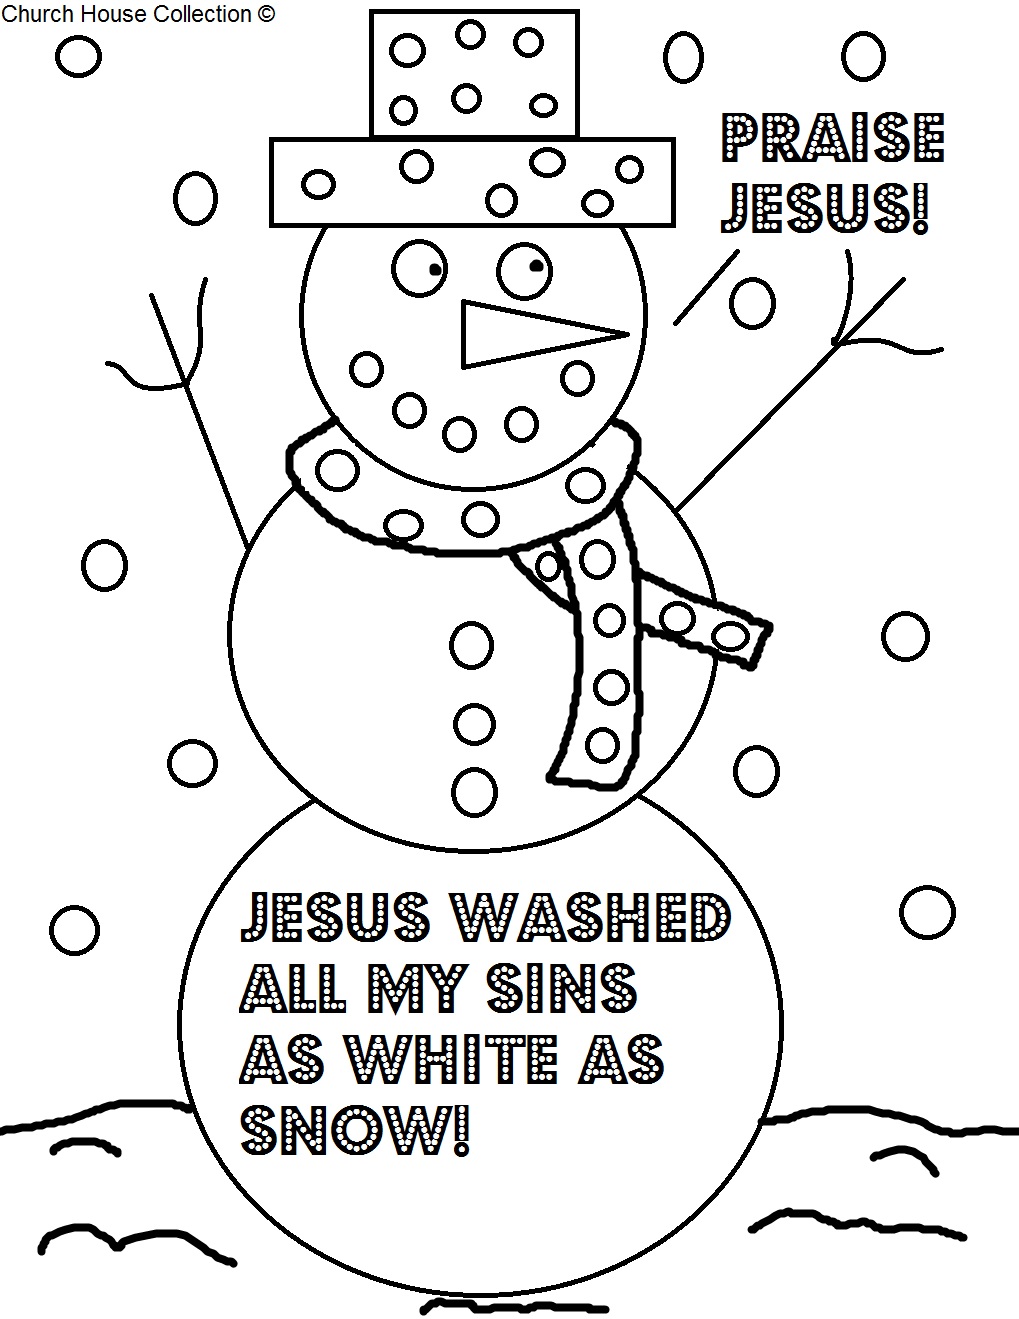 Free Christmas Snowman "Praise Jesus" Coloring Page for Sunday School Kids by Church House Collection. Jesus Washed My Sins White As Snow printable template coloring sheet 